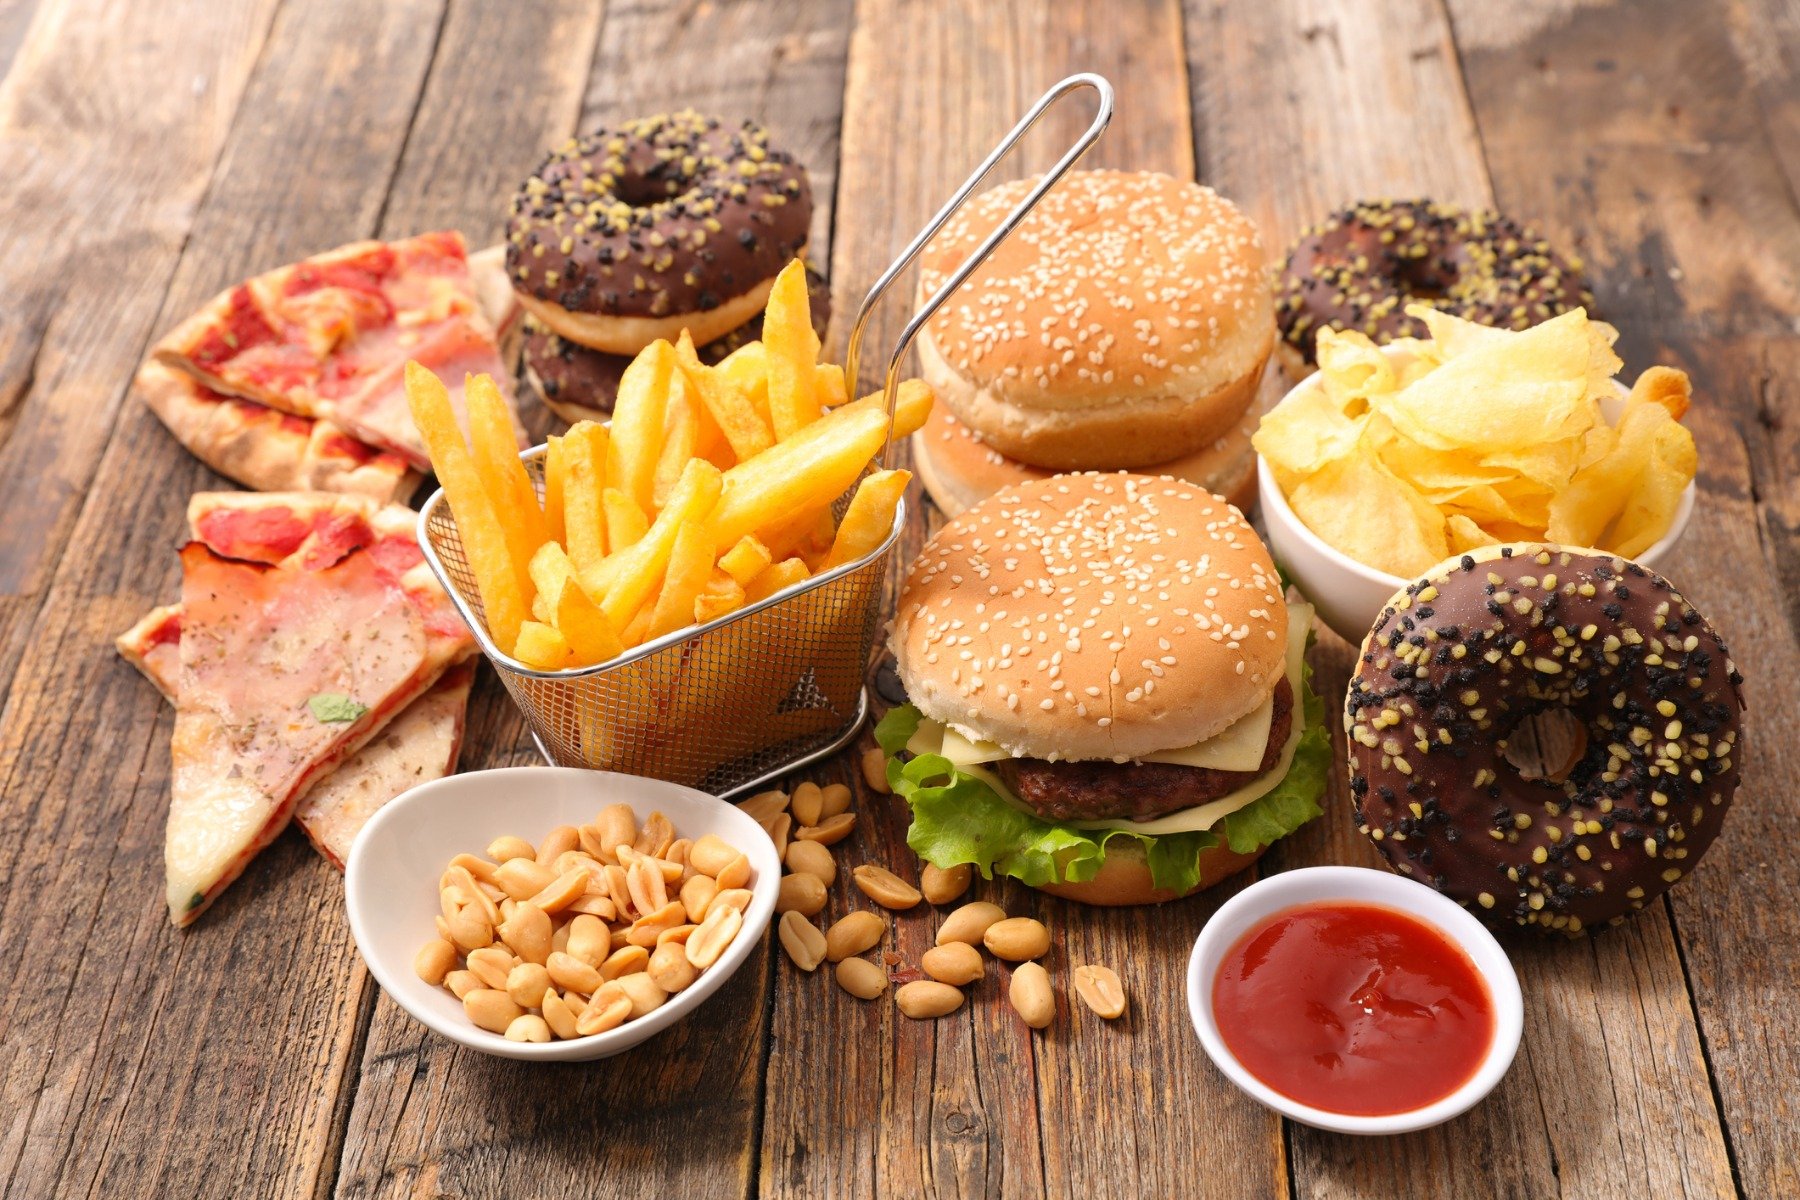 7 Simple Rules For Planning A Guilt-Free Cheat Meal